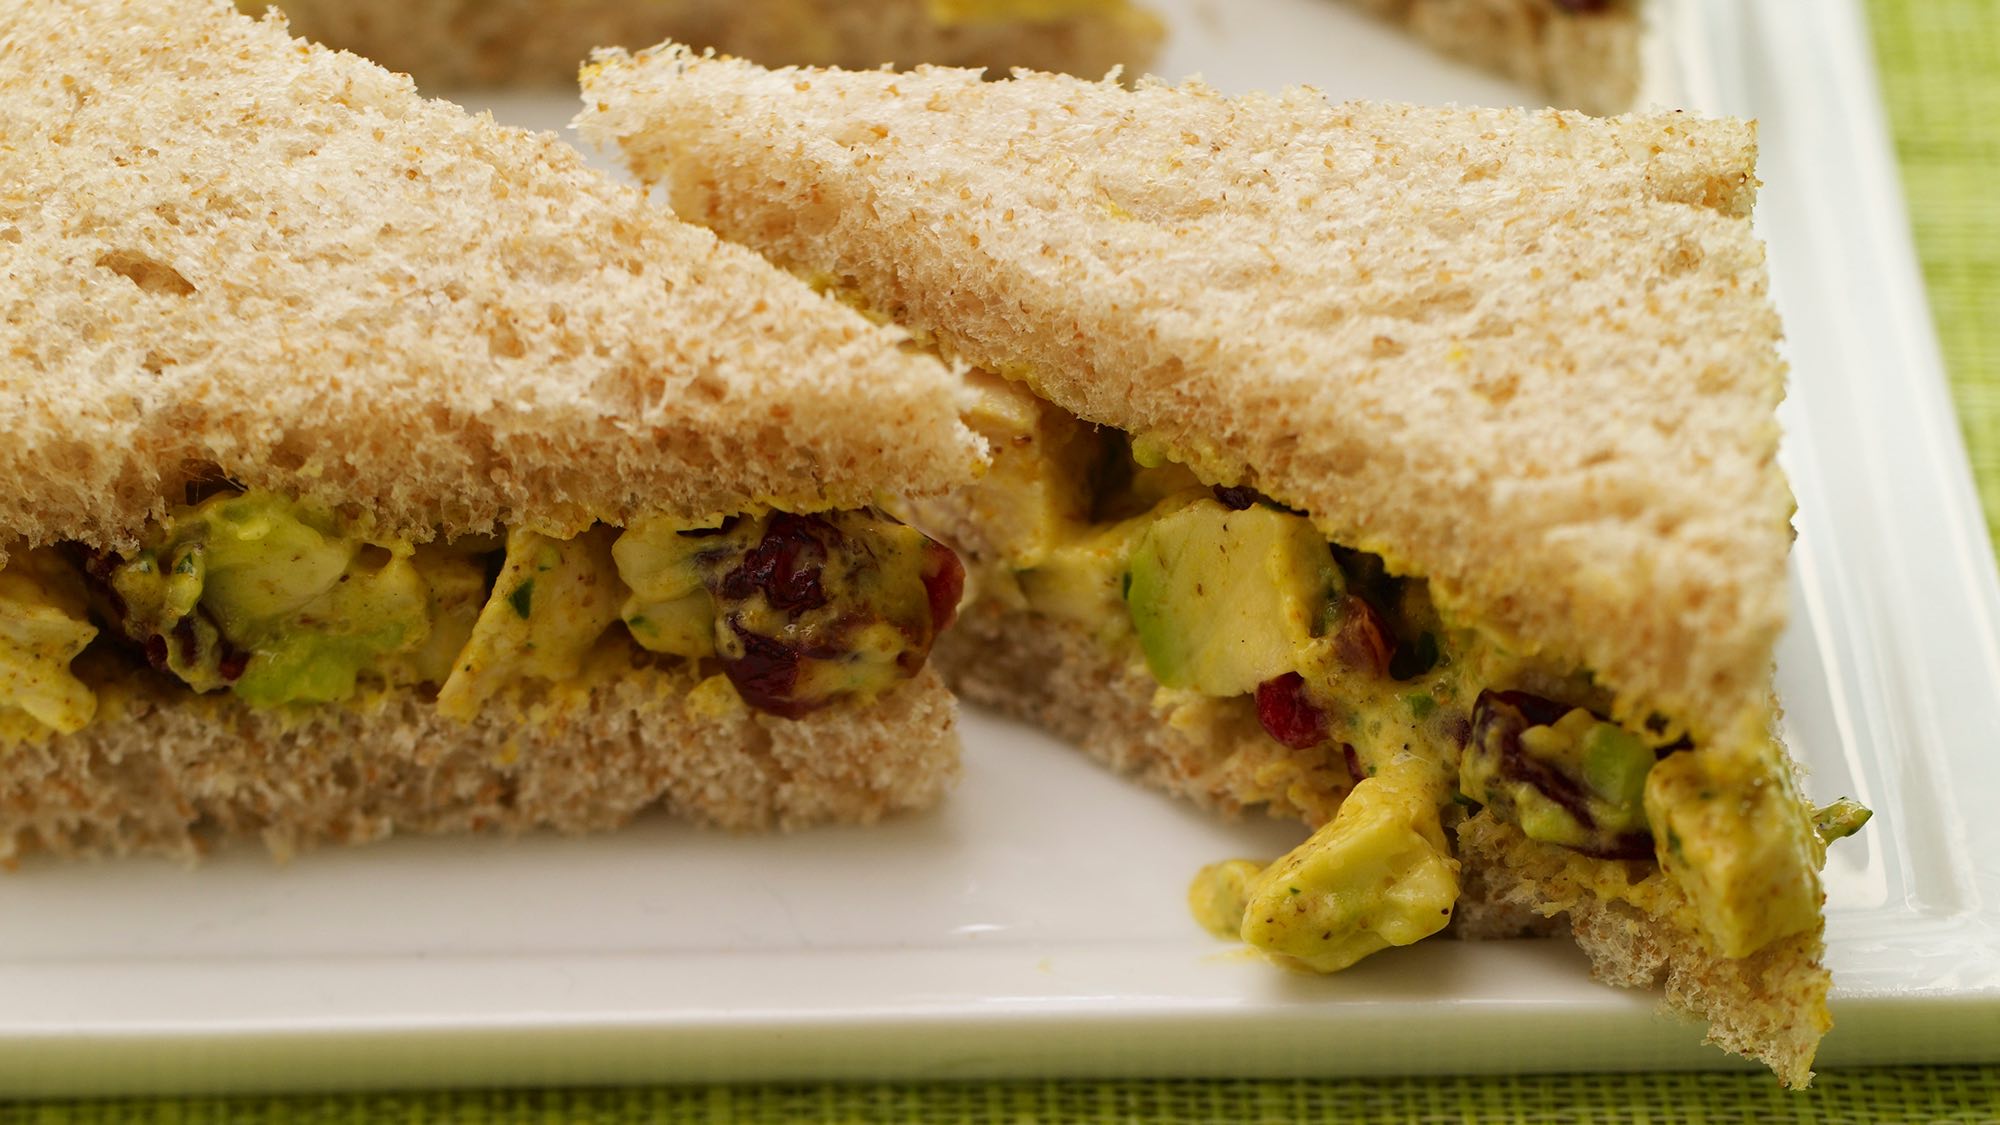 curried-chicken-and-avocado-salad-sandwiches.jpg